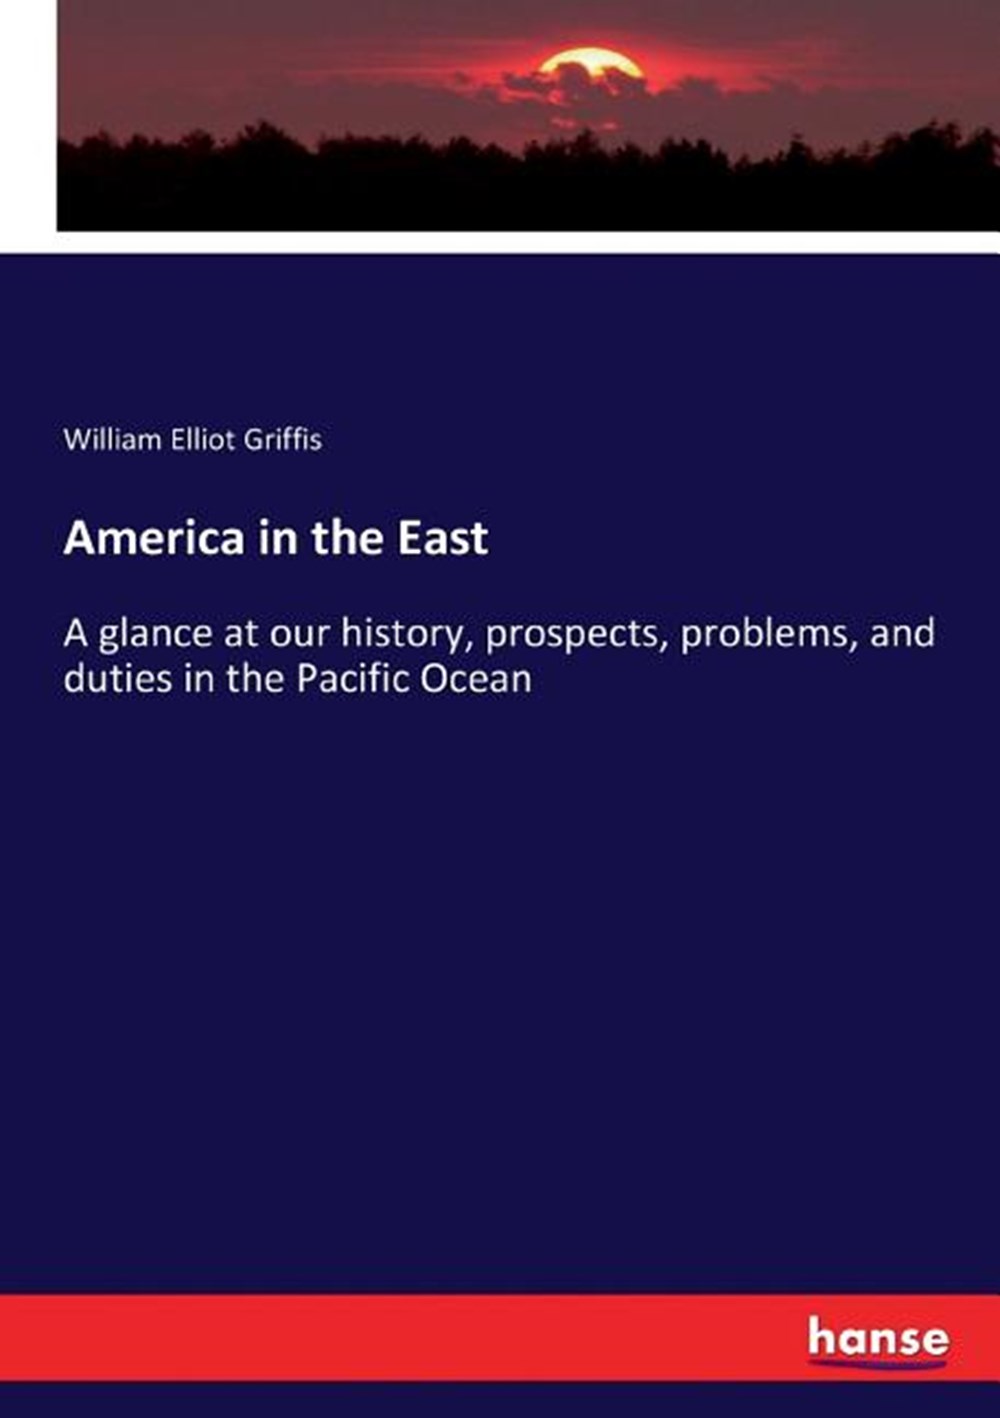 America in the East A glance at our history, prospects, problems, and duties in the Pacific Ocean